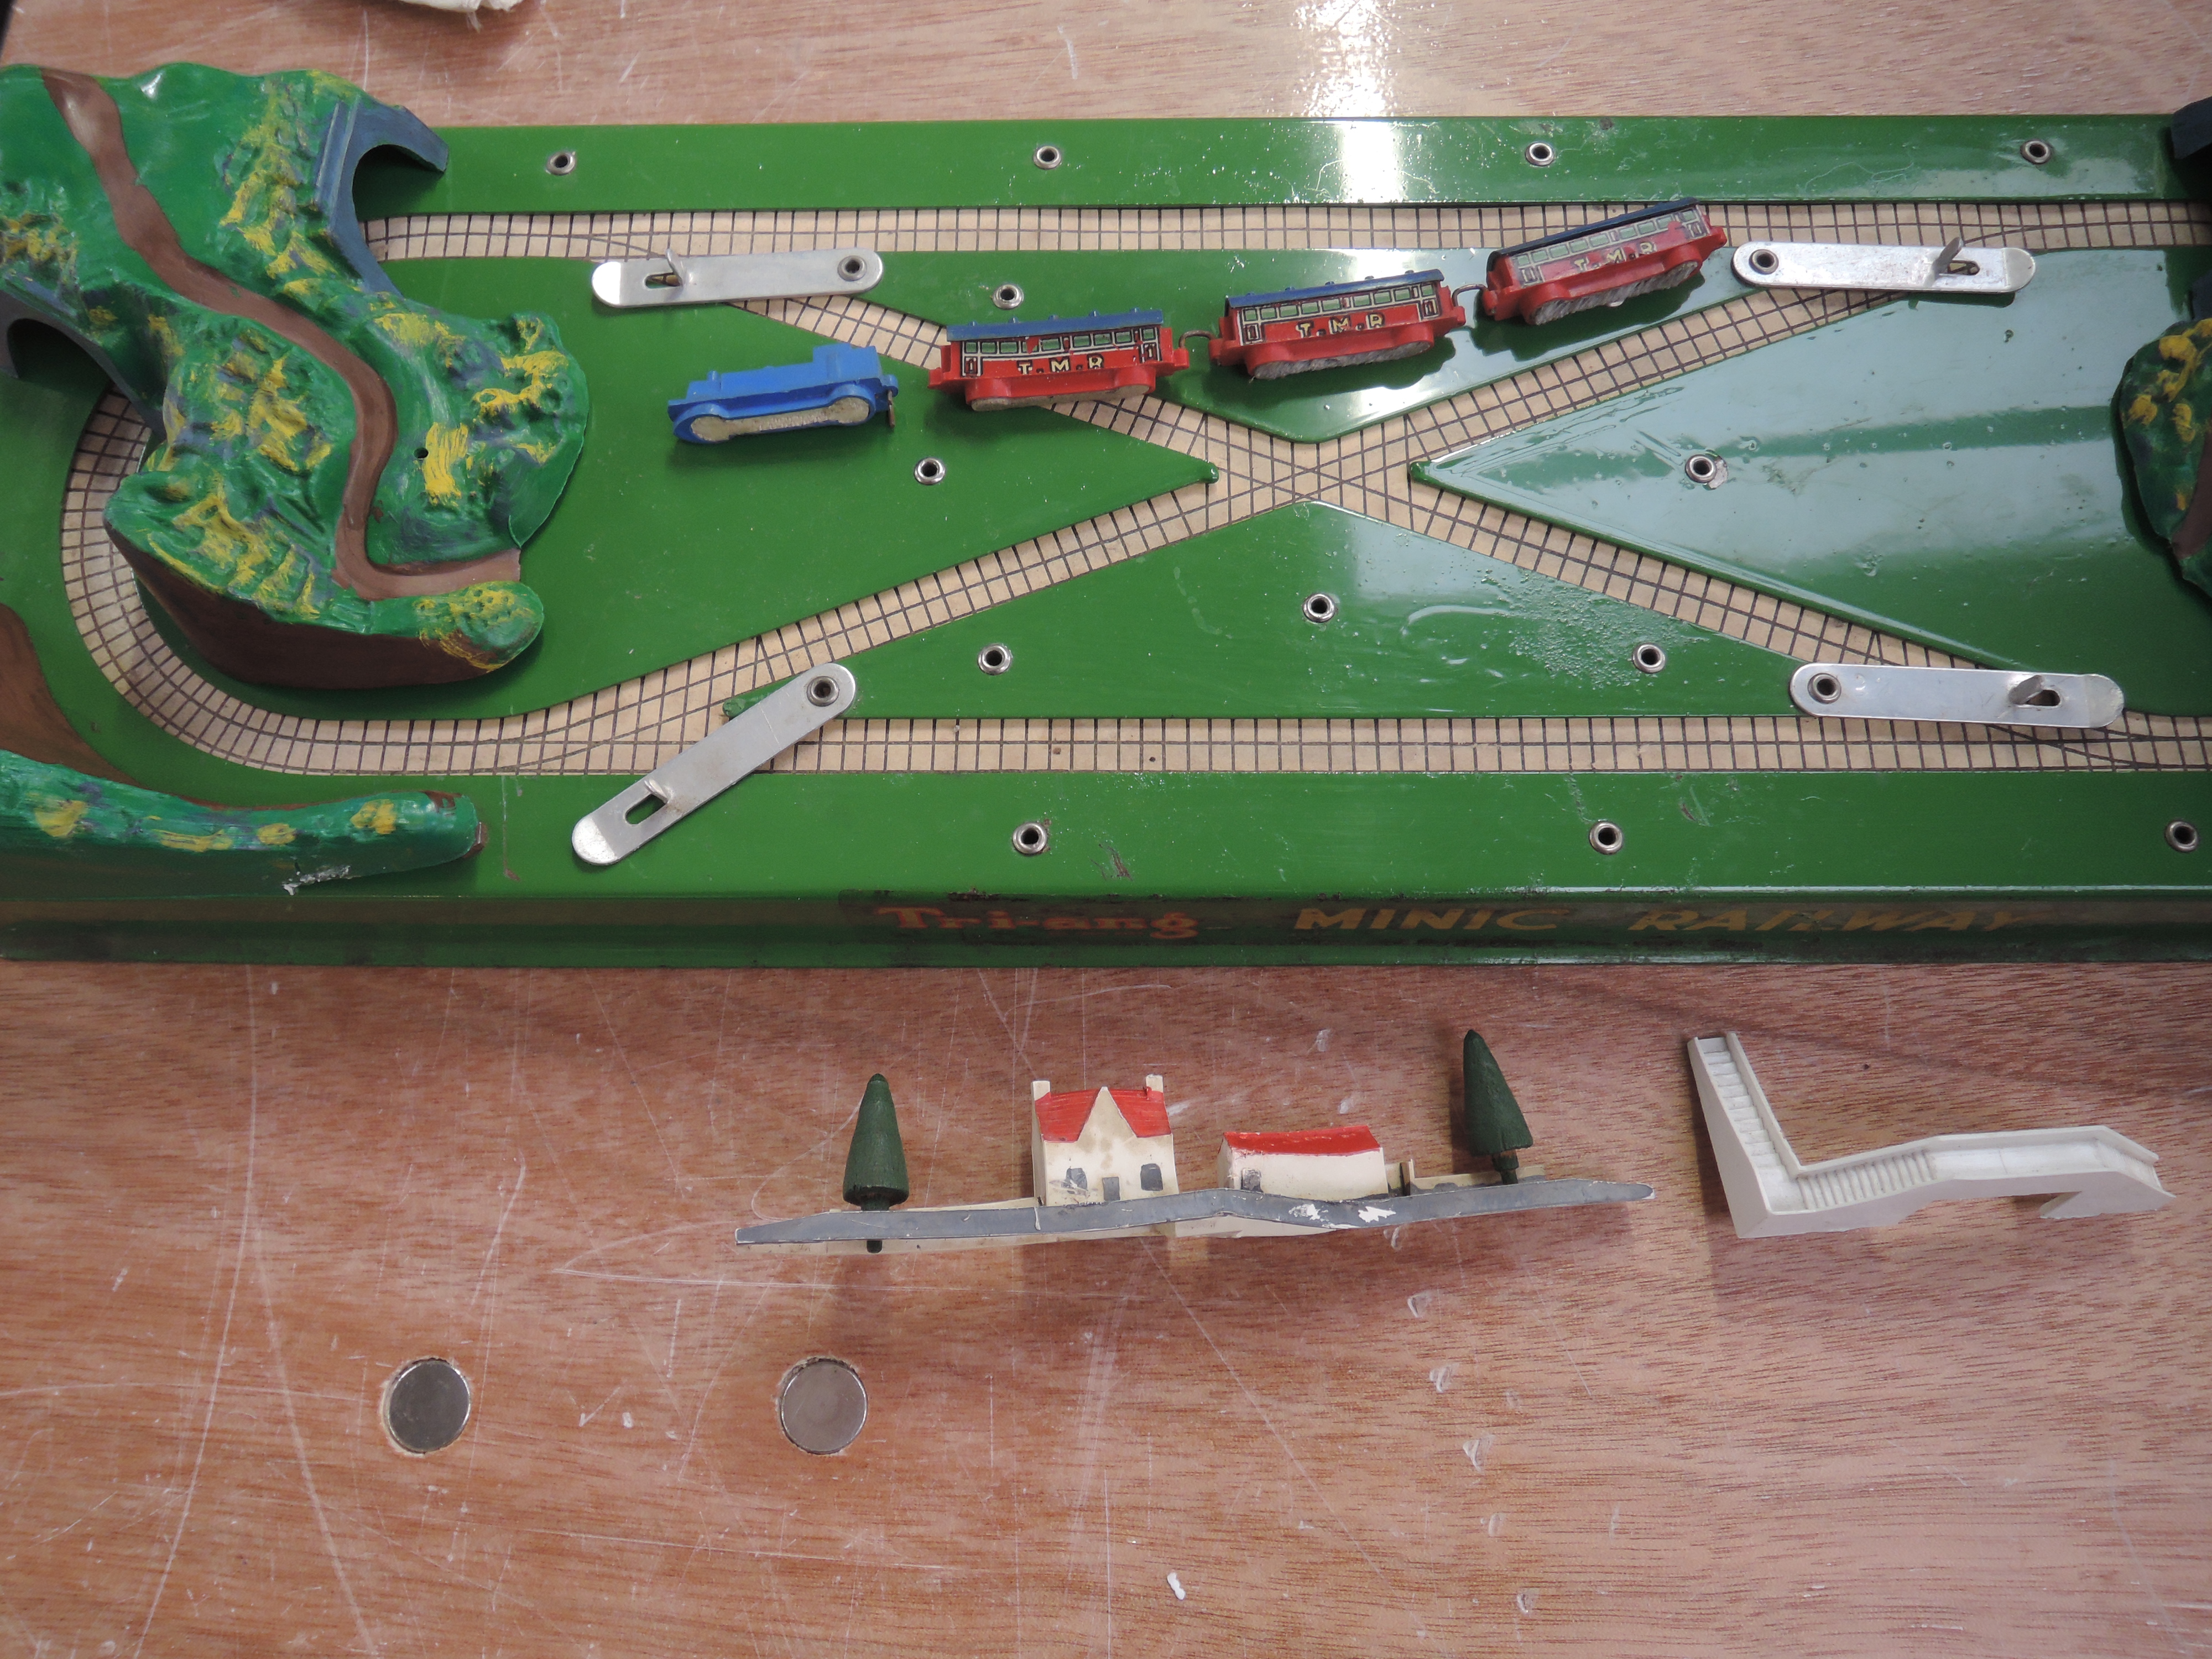 A Triang Minic electric & tinplate The Smallest Electric Toy Railway In The World boxed part set - Image 2 of 6